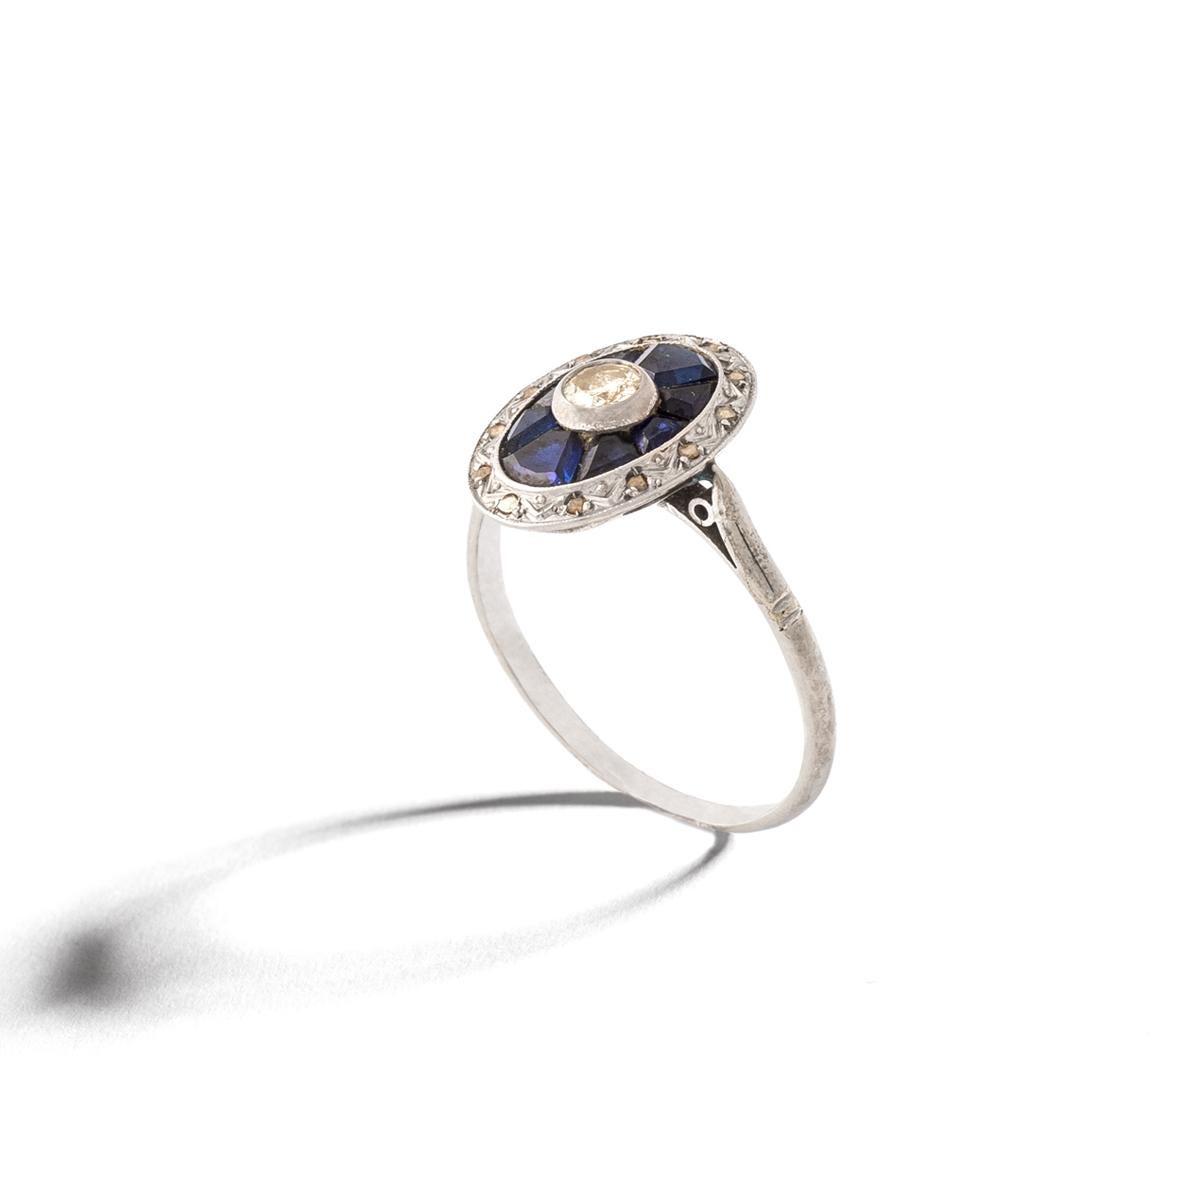 Art Deco Diamond and calibrated Sapphire on Platinum Ring.
Diamond estimated weight 0.37 carat.
Round cut. Estimated to be L-M color and Si clarity.
Diamond diameter: approximately 4.65 millimeters.
Ring Size: 7 3/4.
Gross weight: 2.54 grams.